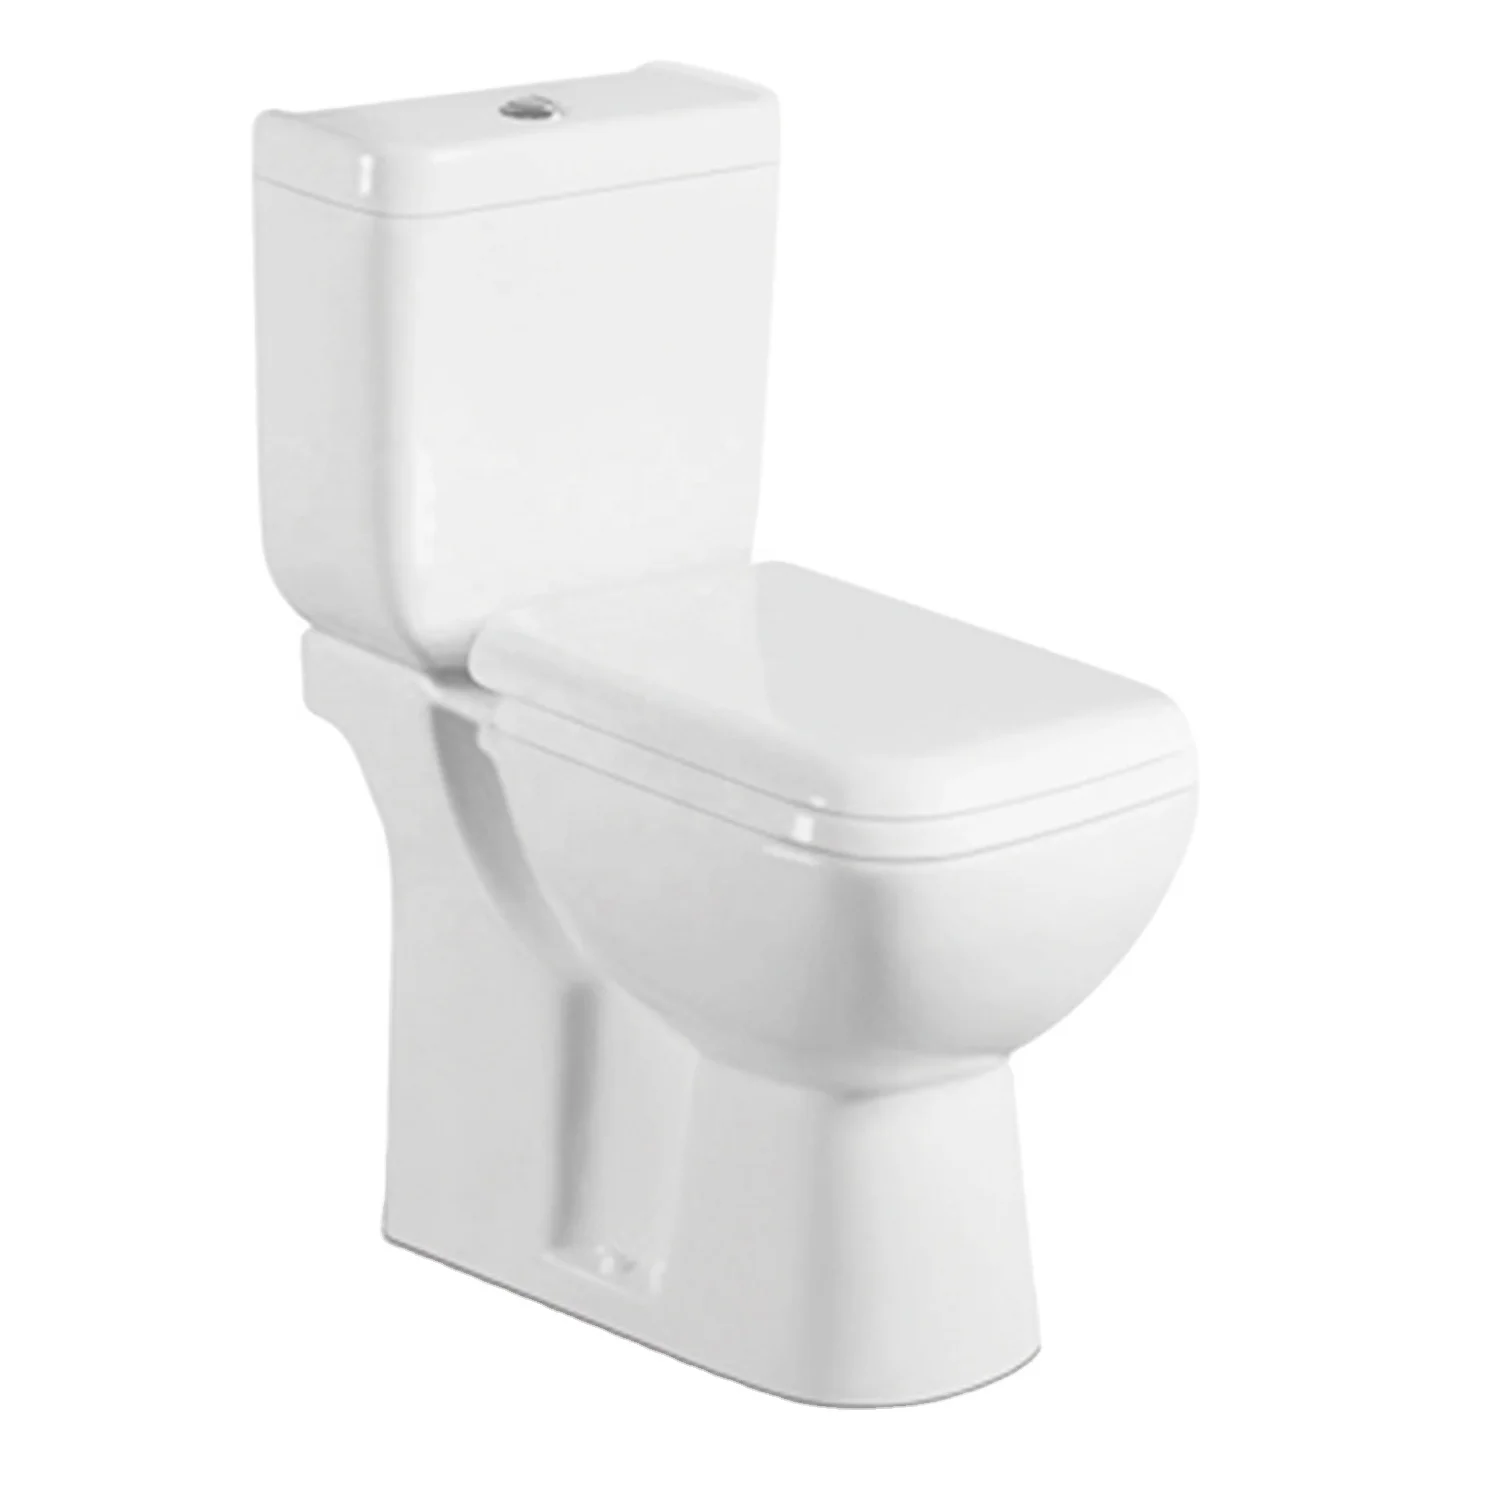 JOININ hot sales Africa new products bathroom ceramic wc two piece toilets JY2103